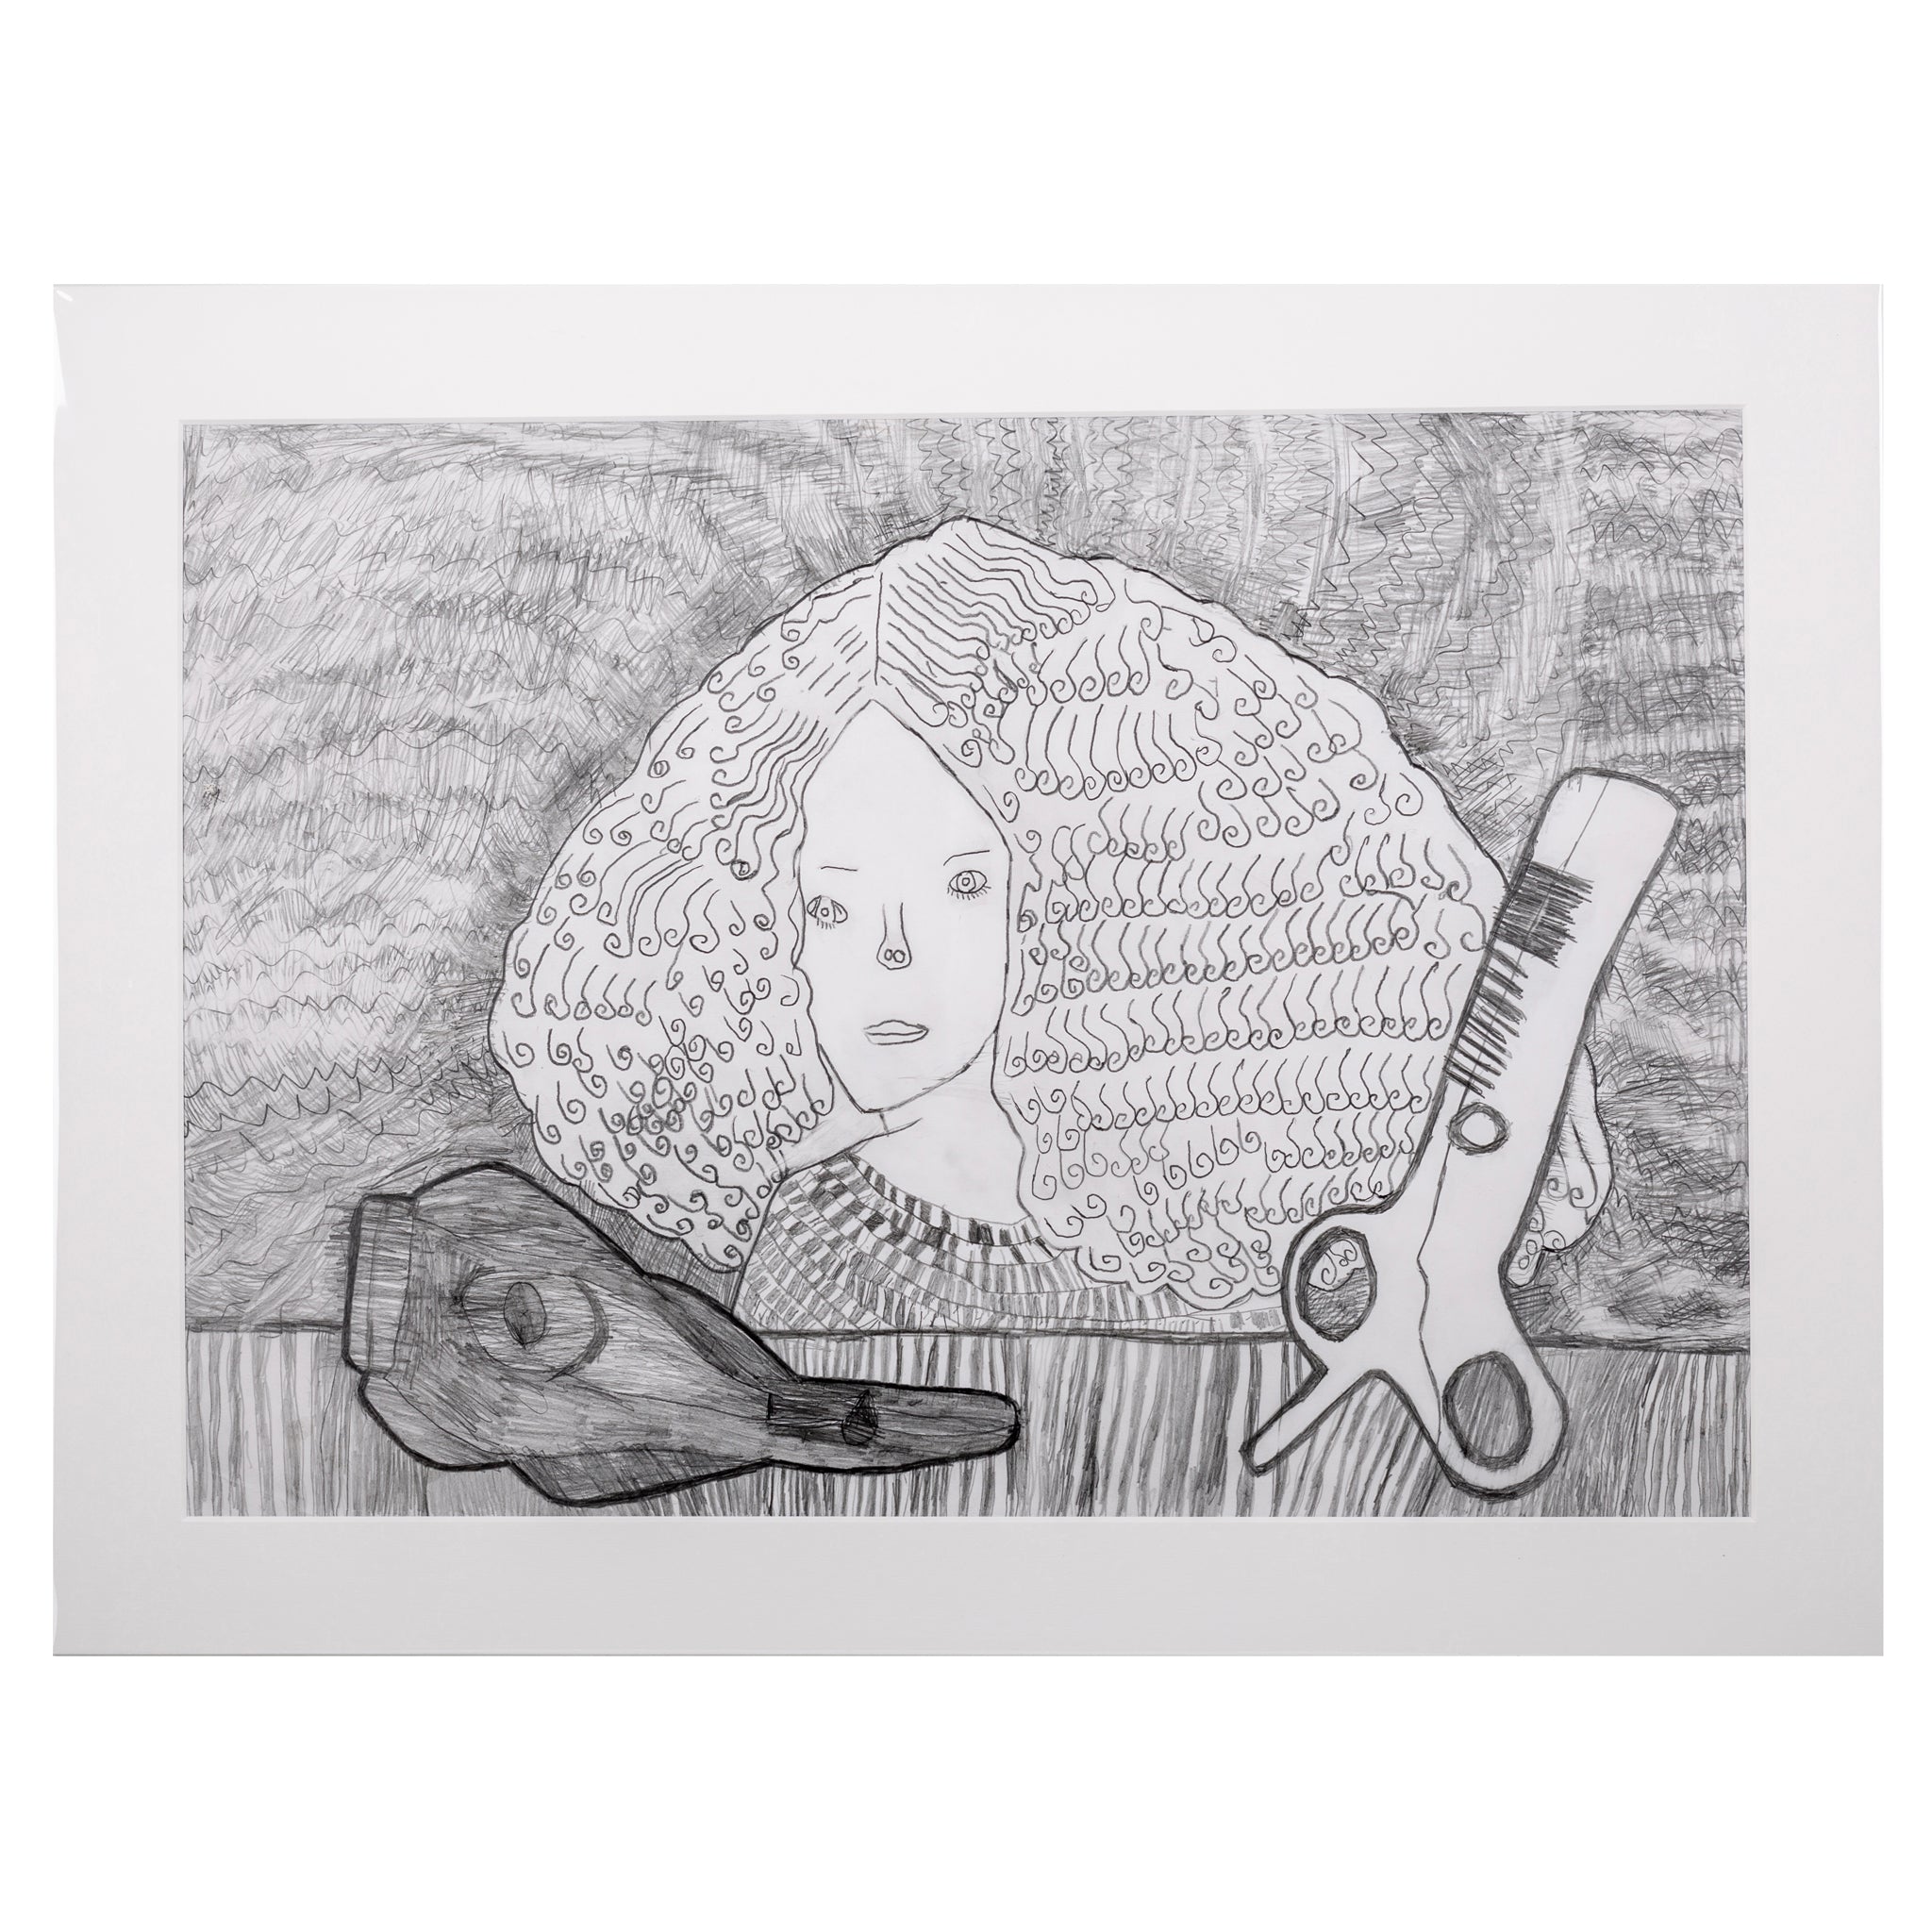 Hand drawn picture in pencil of a woman with large hair and scissors 